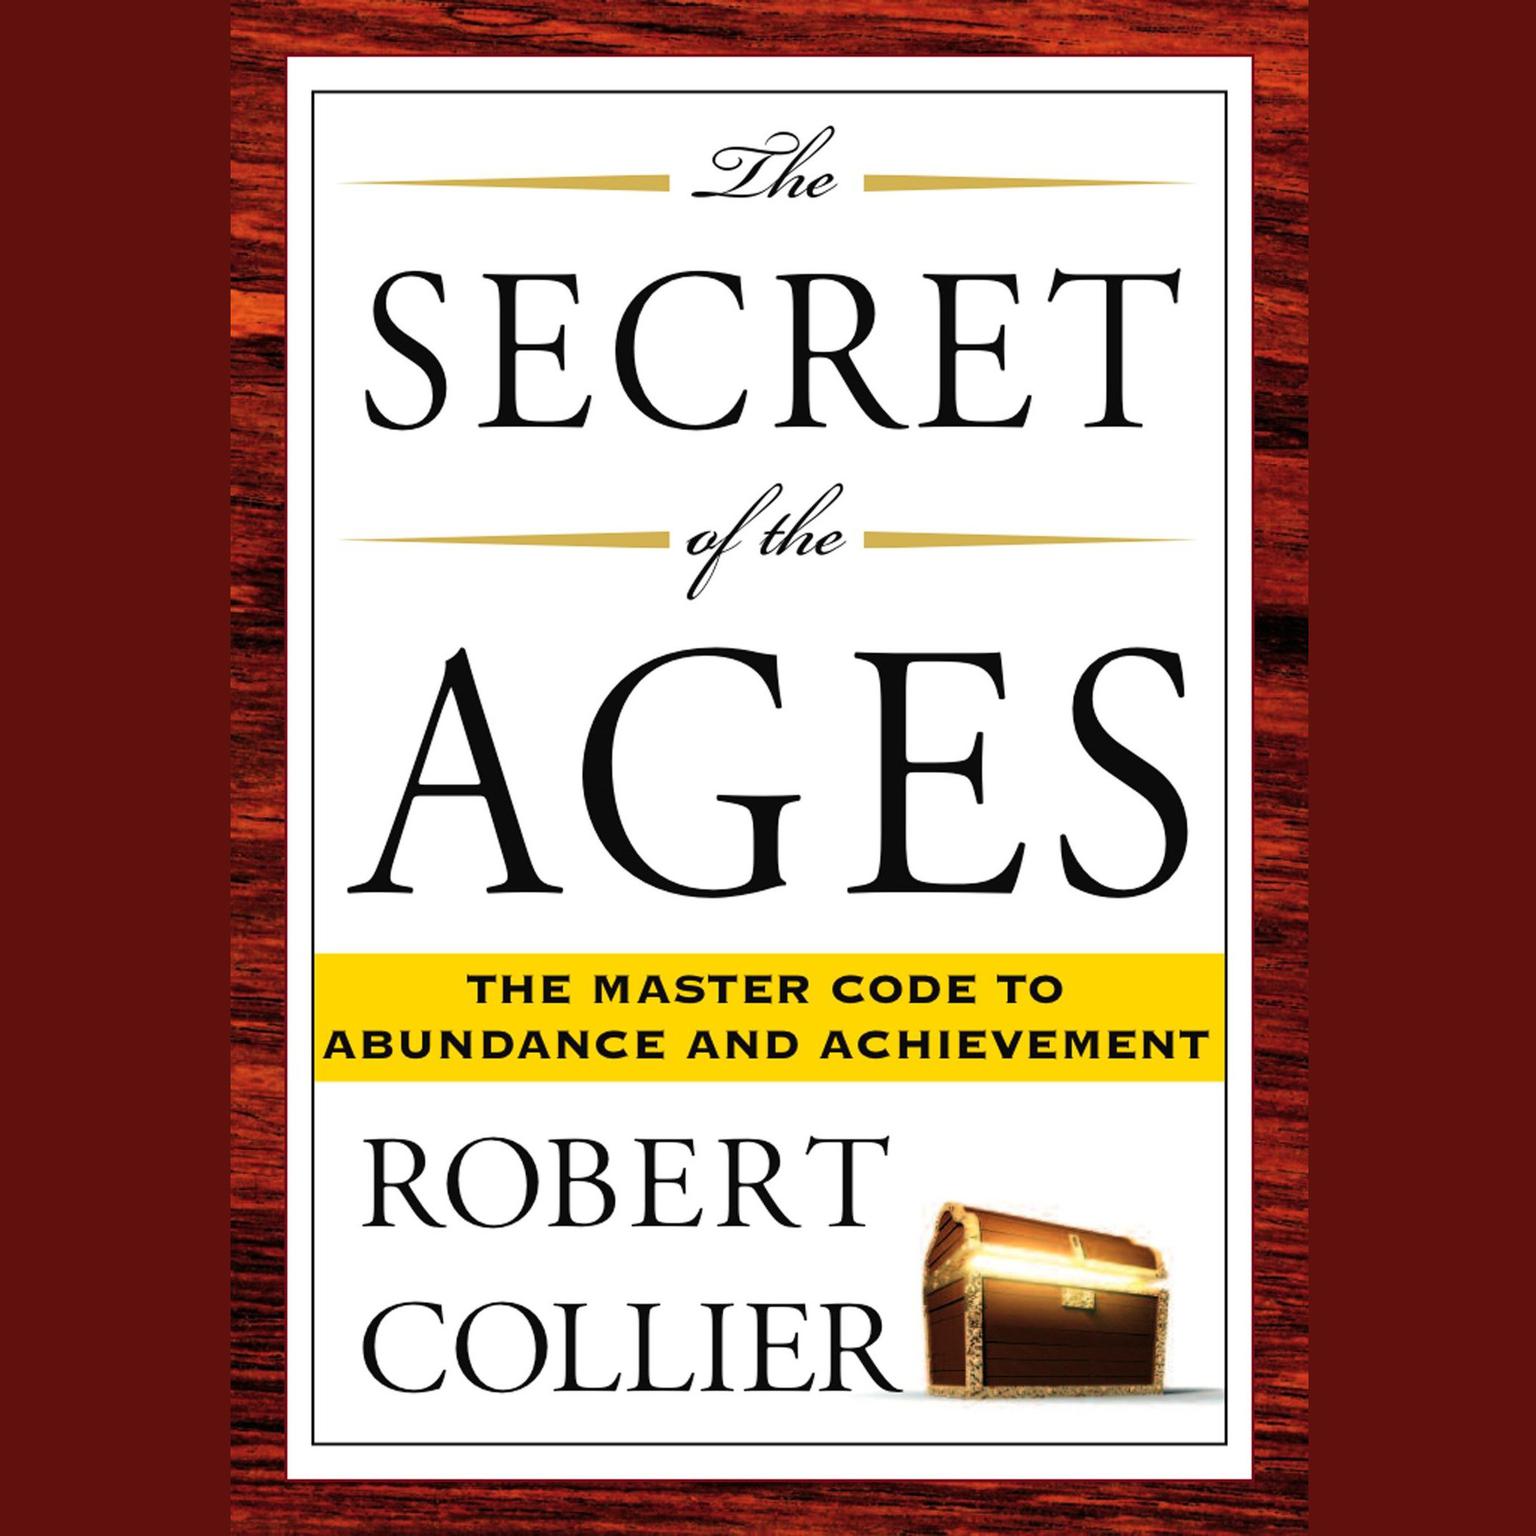 The Secret of the Ages (Abridged): The Master Code to Abundance and Achievement Audiobook, by Robert Collier